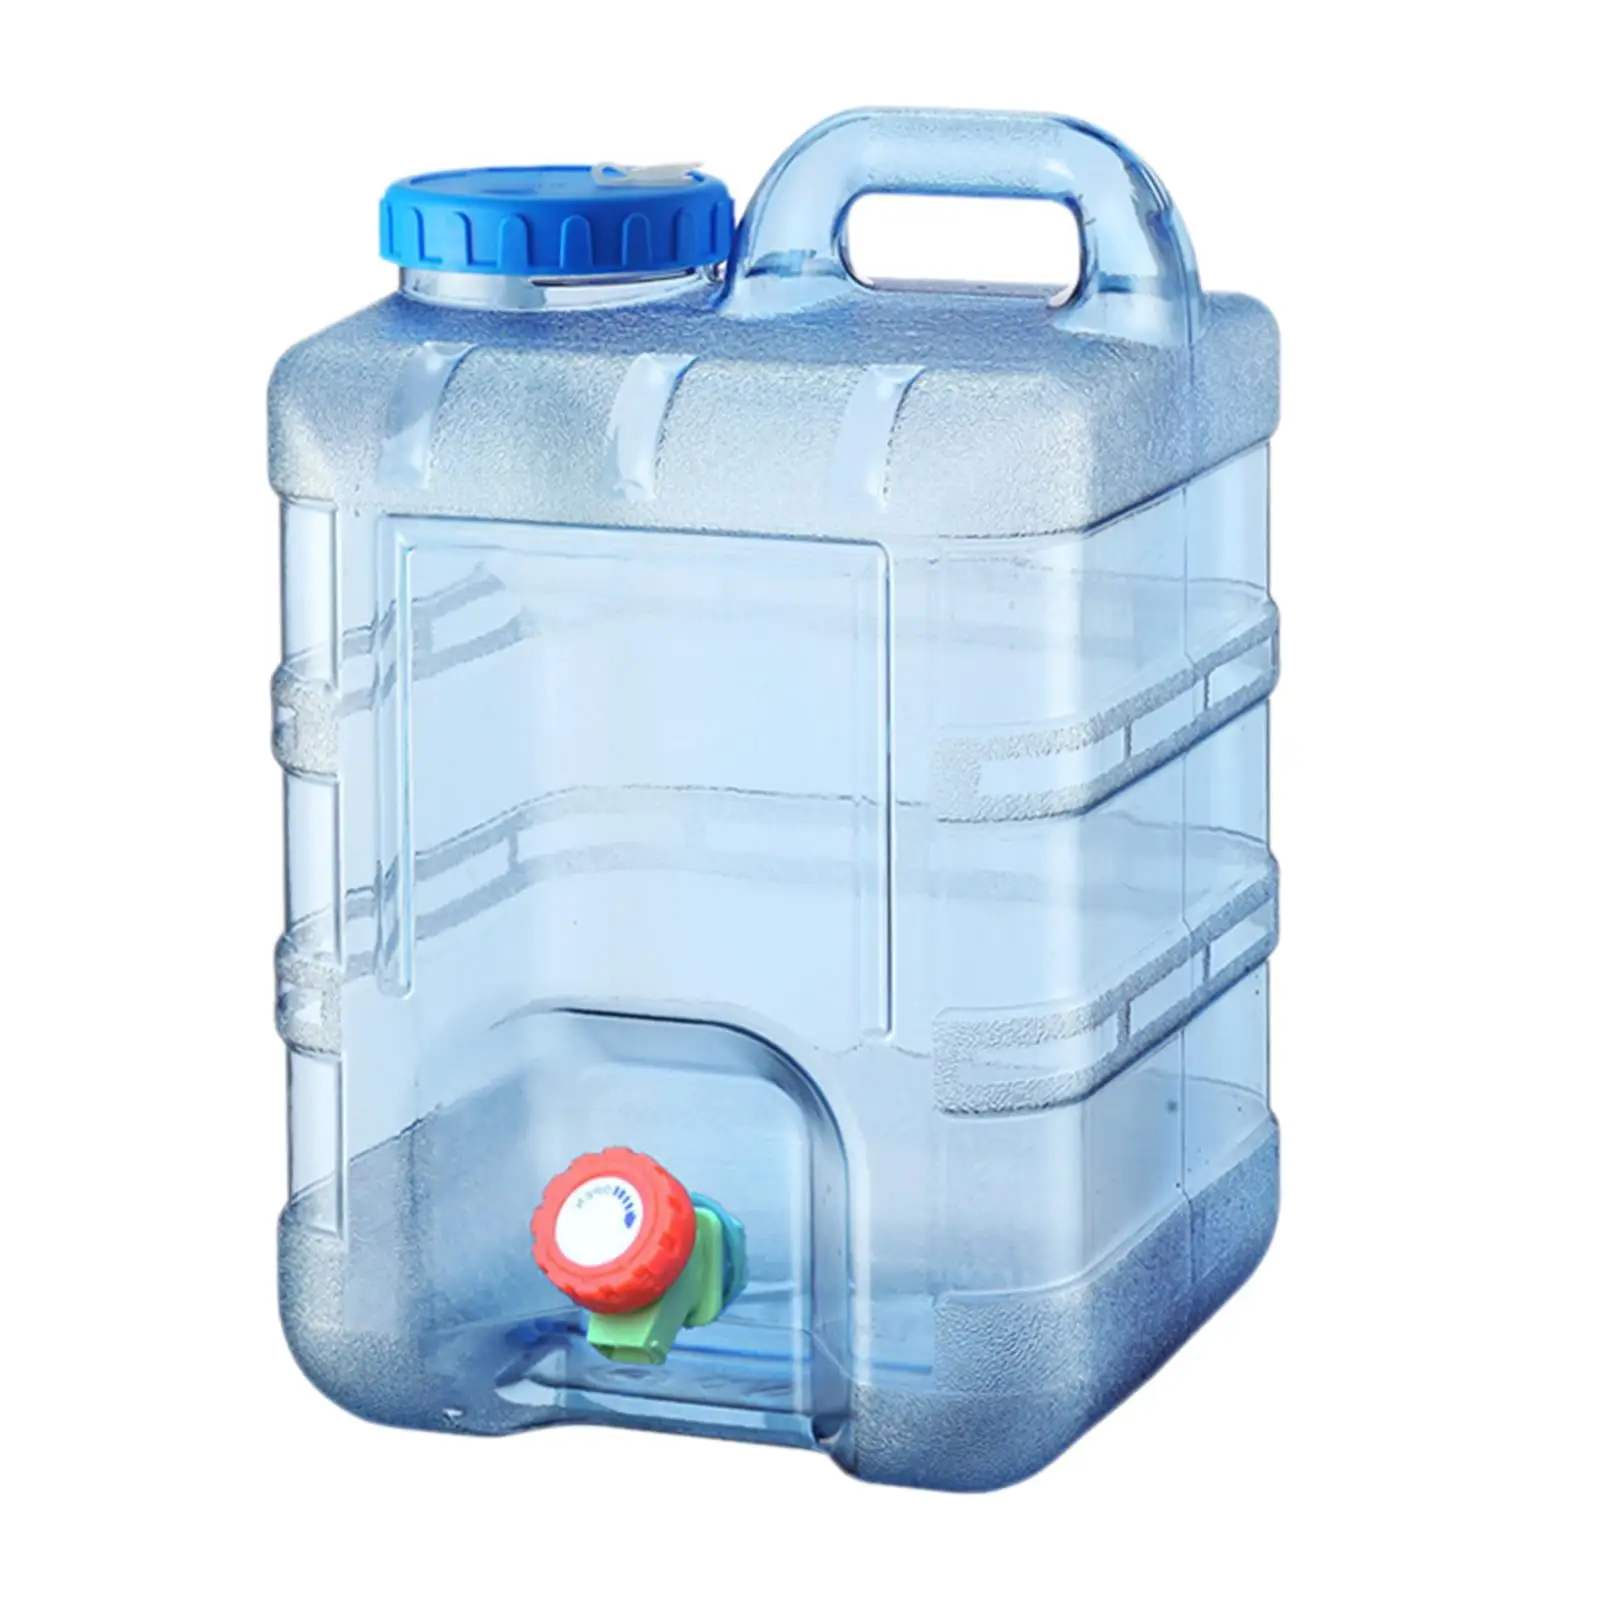 Outdoor Water Bucket Portable Water Tank Container with Faucet for Drinking Camp Cooking Picnic BBQ 20L Capacity Water Tank